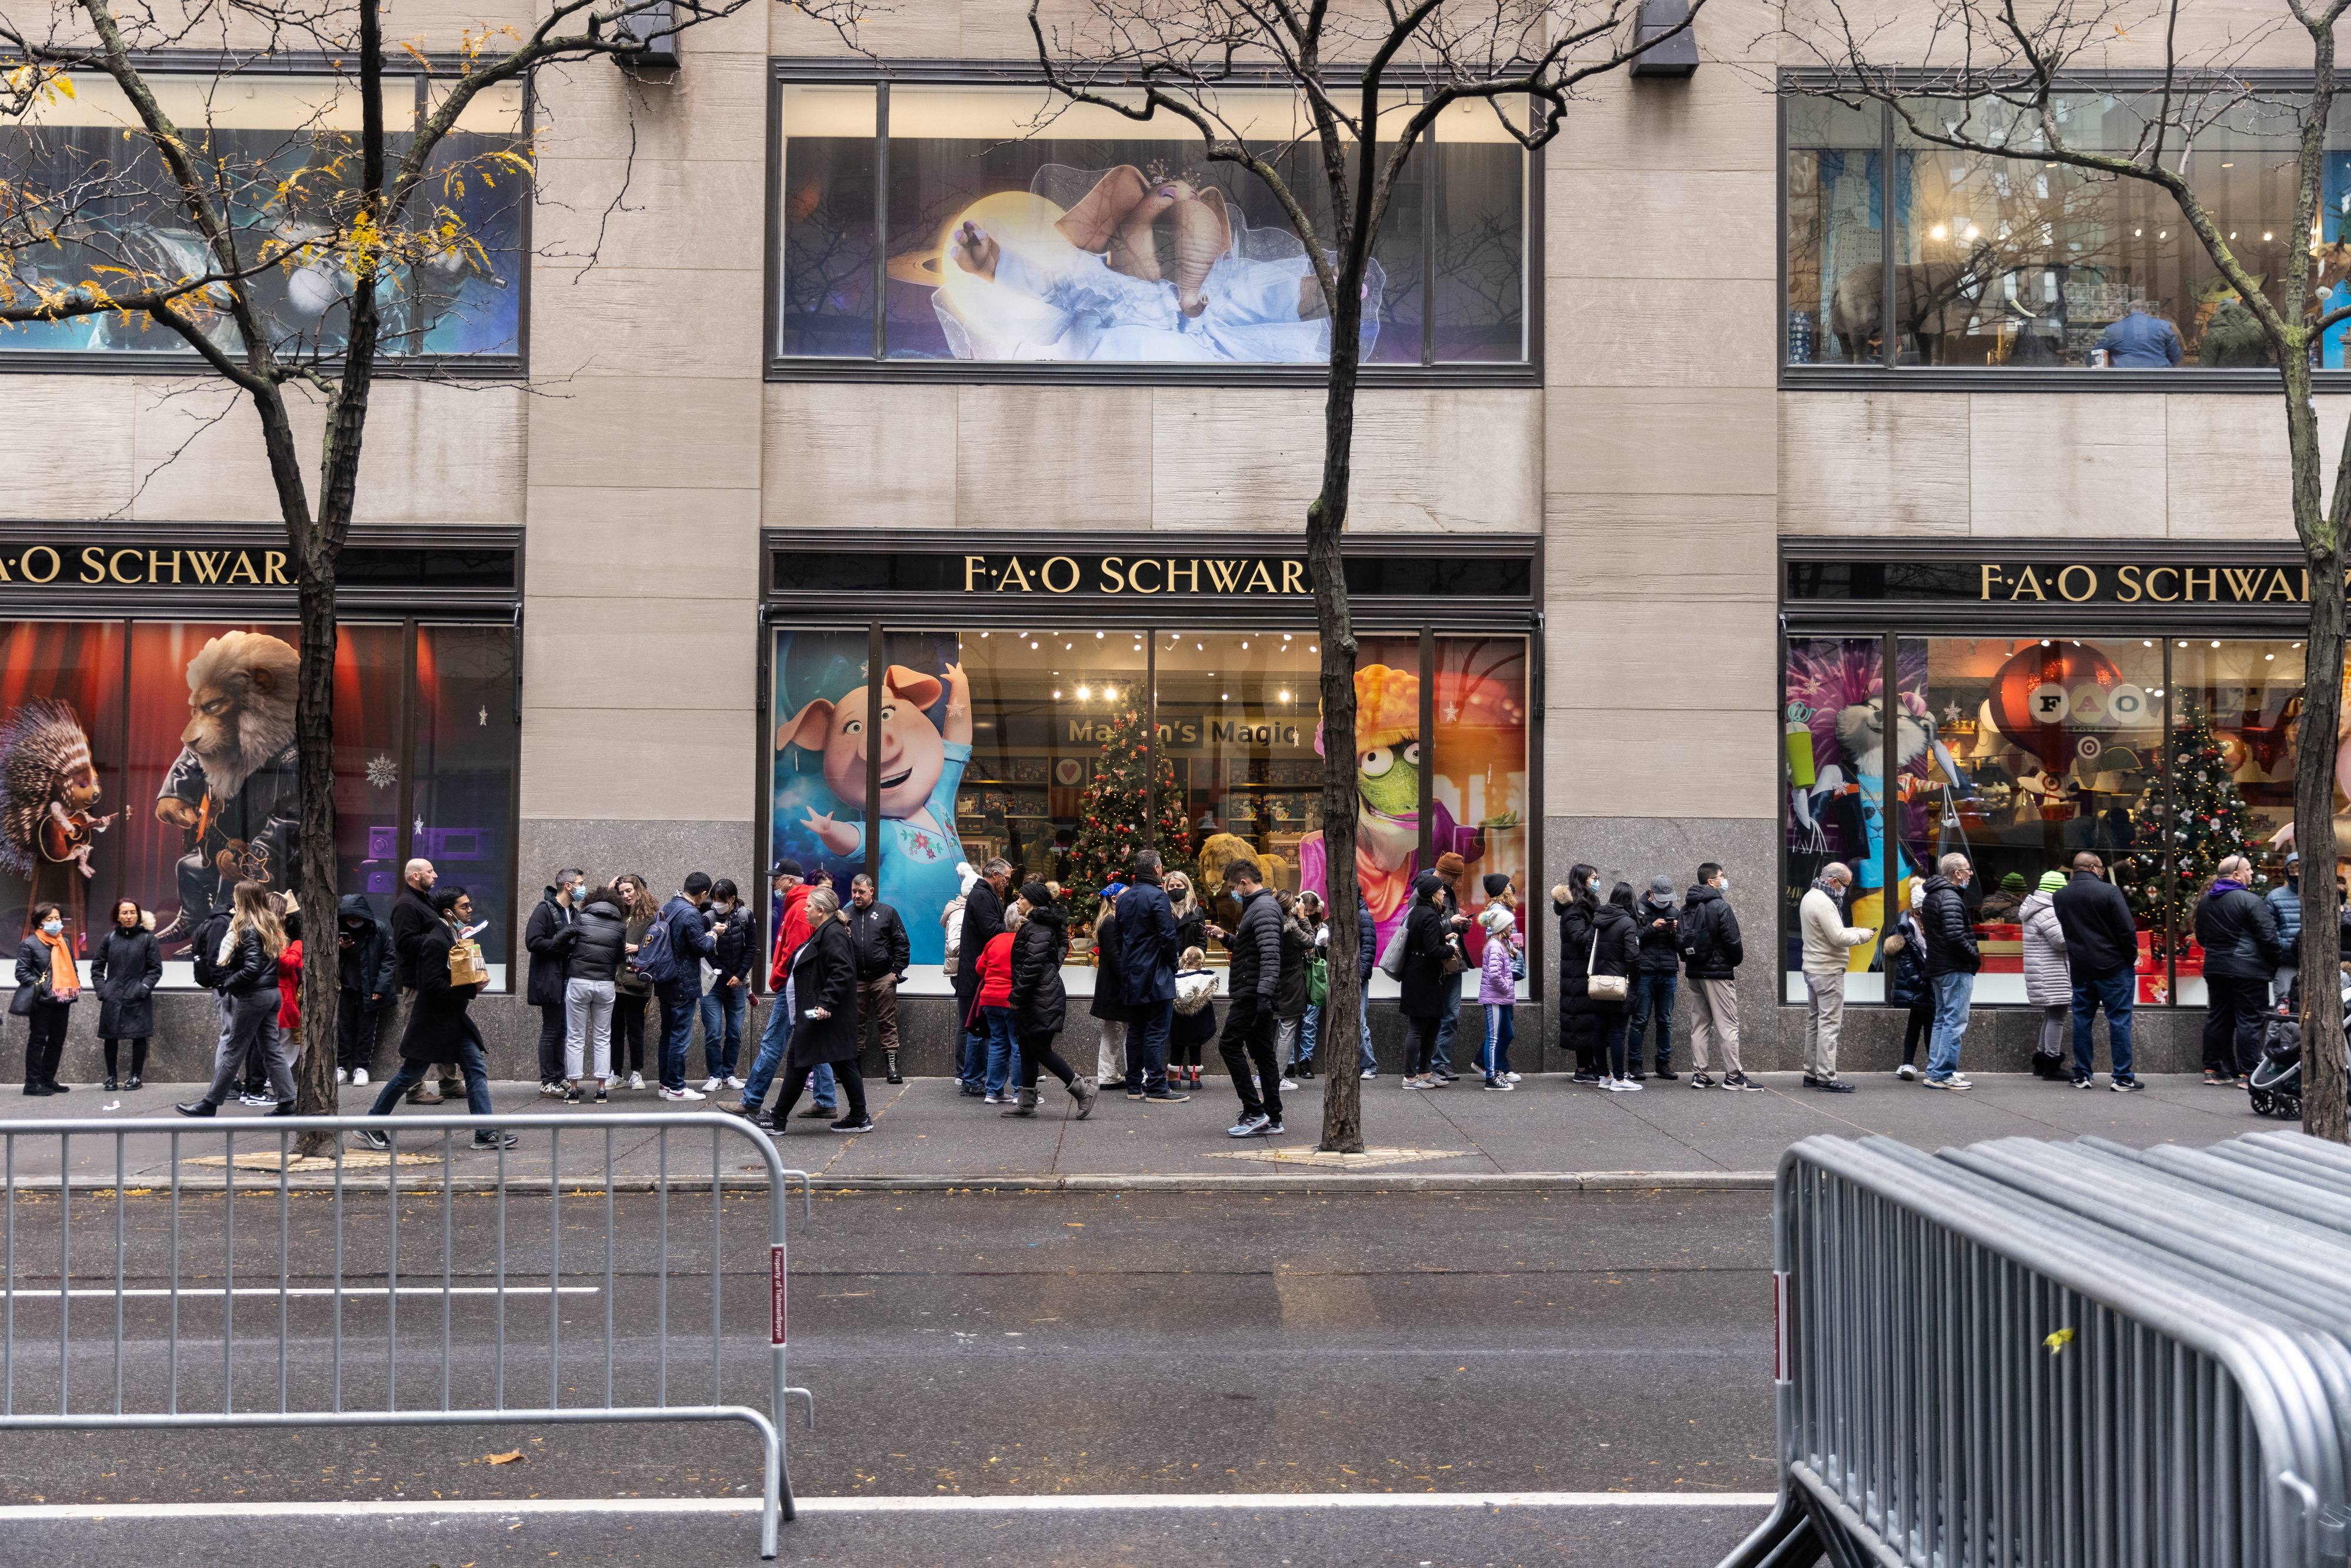 Shoppers wait in line to enter a the FAO Schwarz toy store during Black Friday sales in the Manhattan borough of New York City, New York, U.S., November 26, 2021. REUTERS/Jeenah Moon